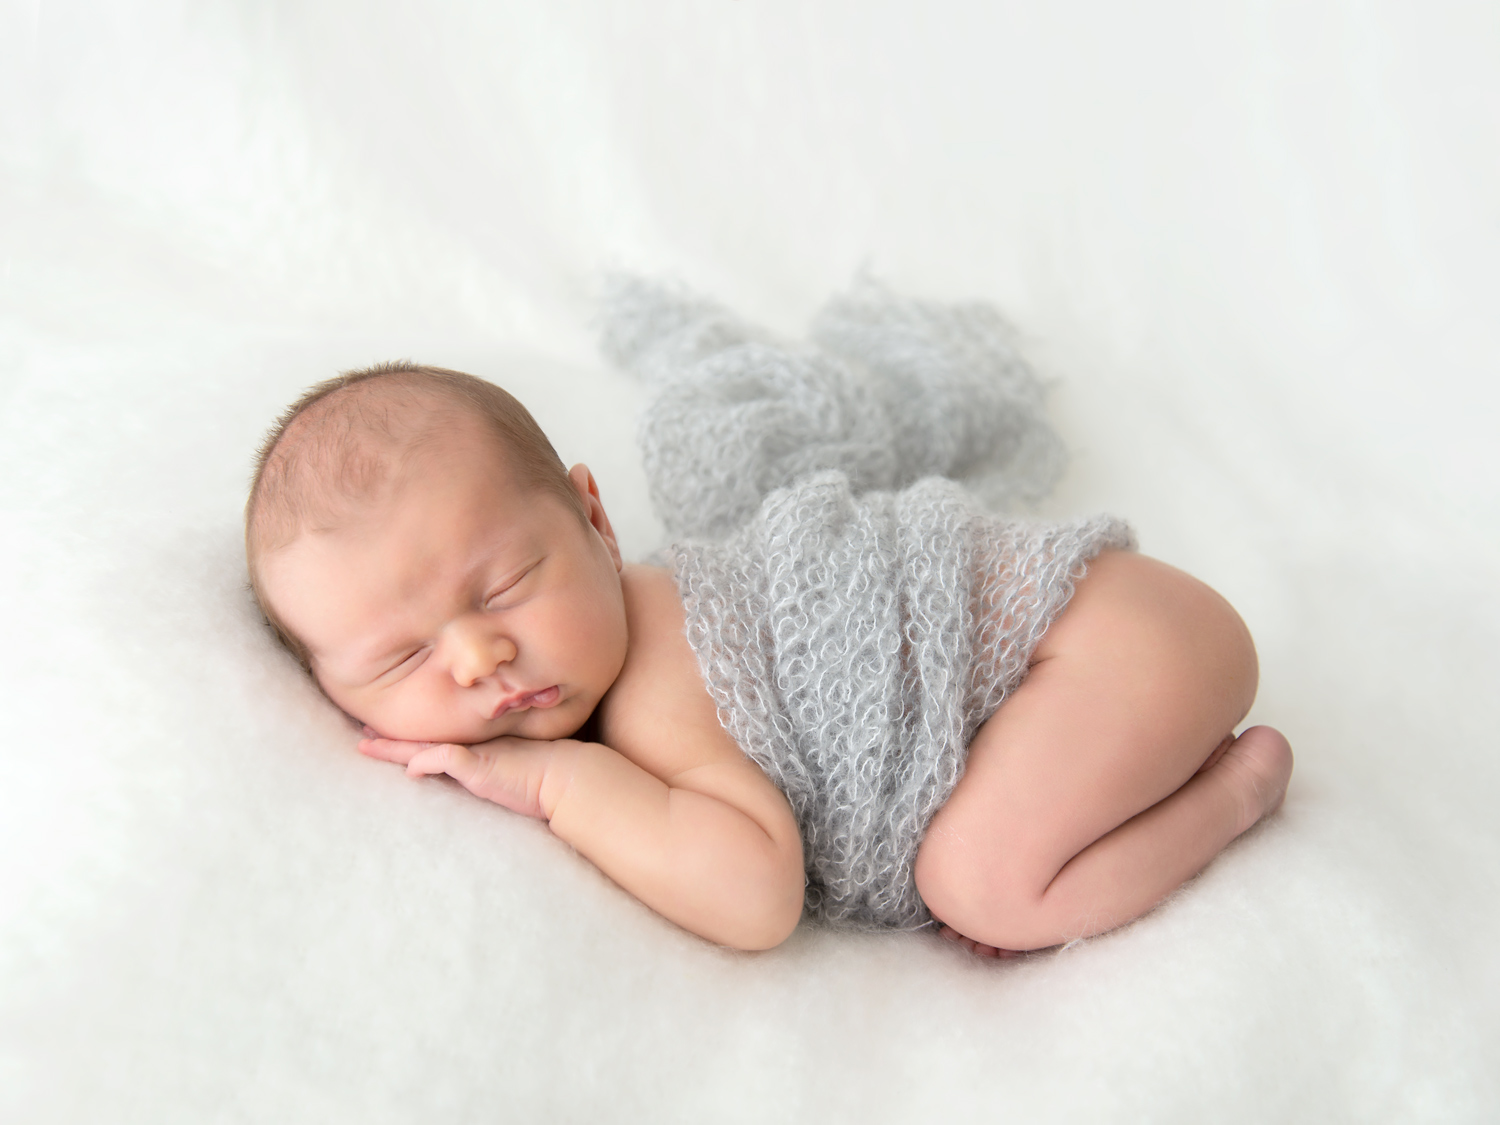 newborn sleeping on soft white blanket with grey knitted wrap